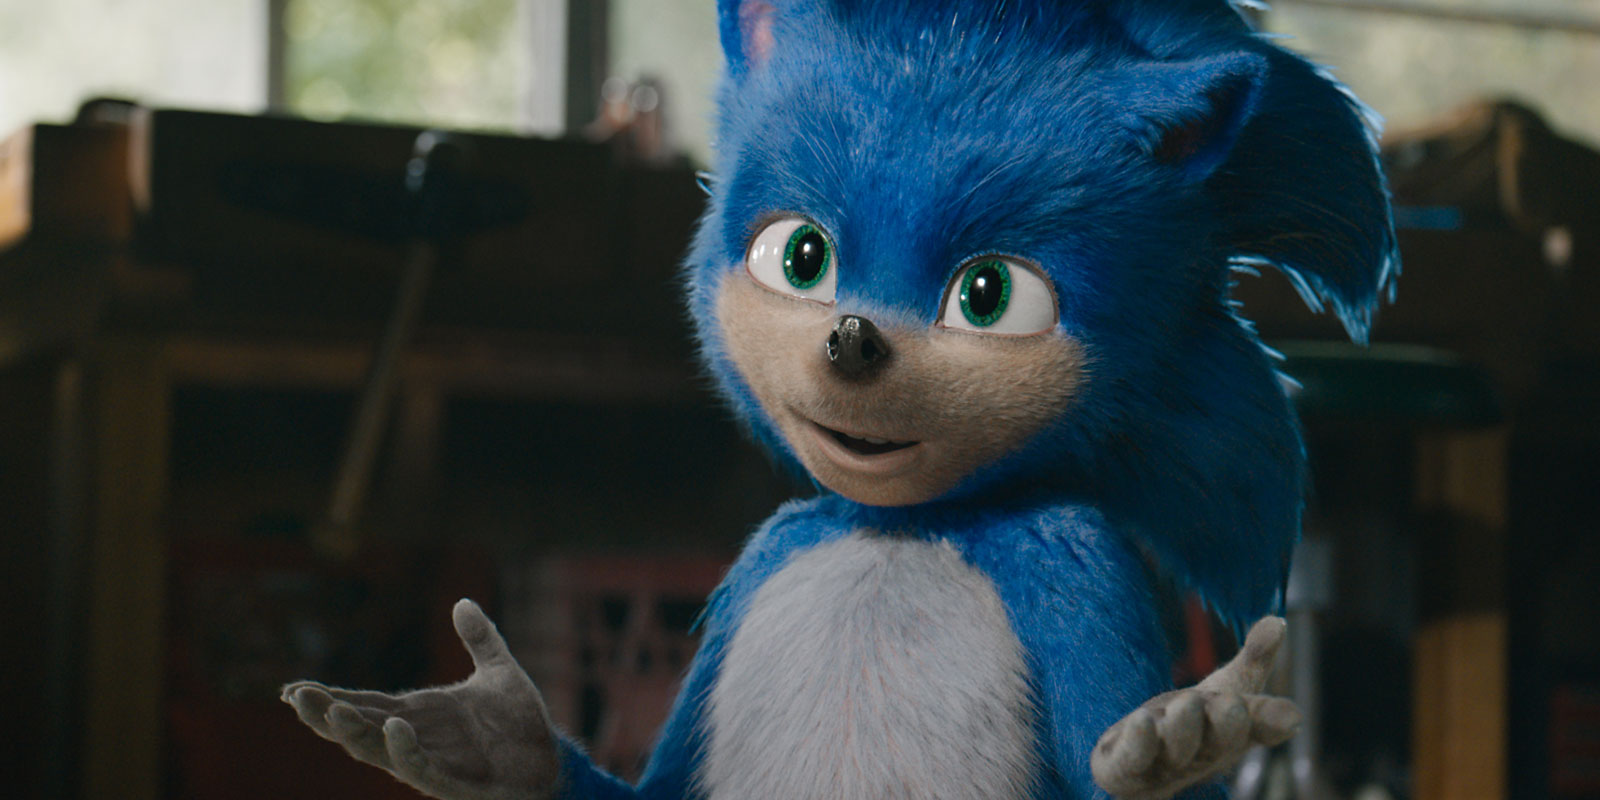 Sonic The Hedgehog (2019) – Official Trailer1600 x 800